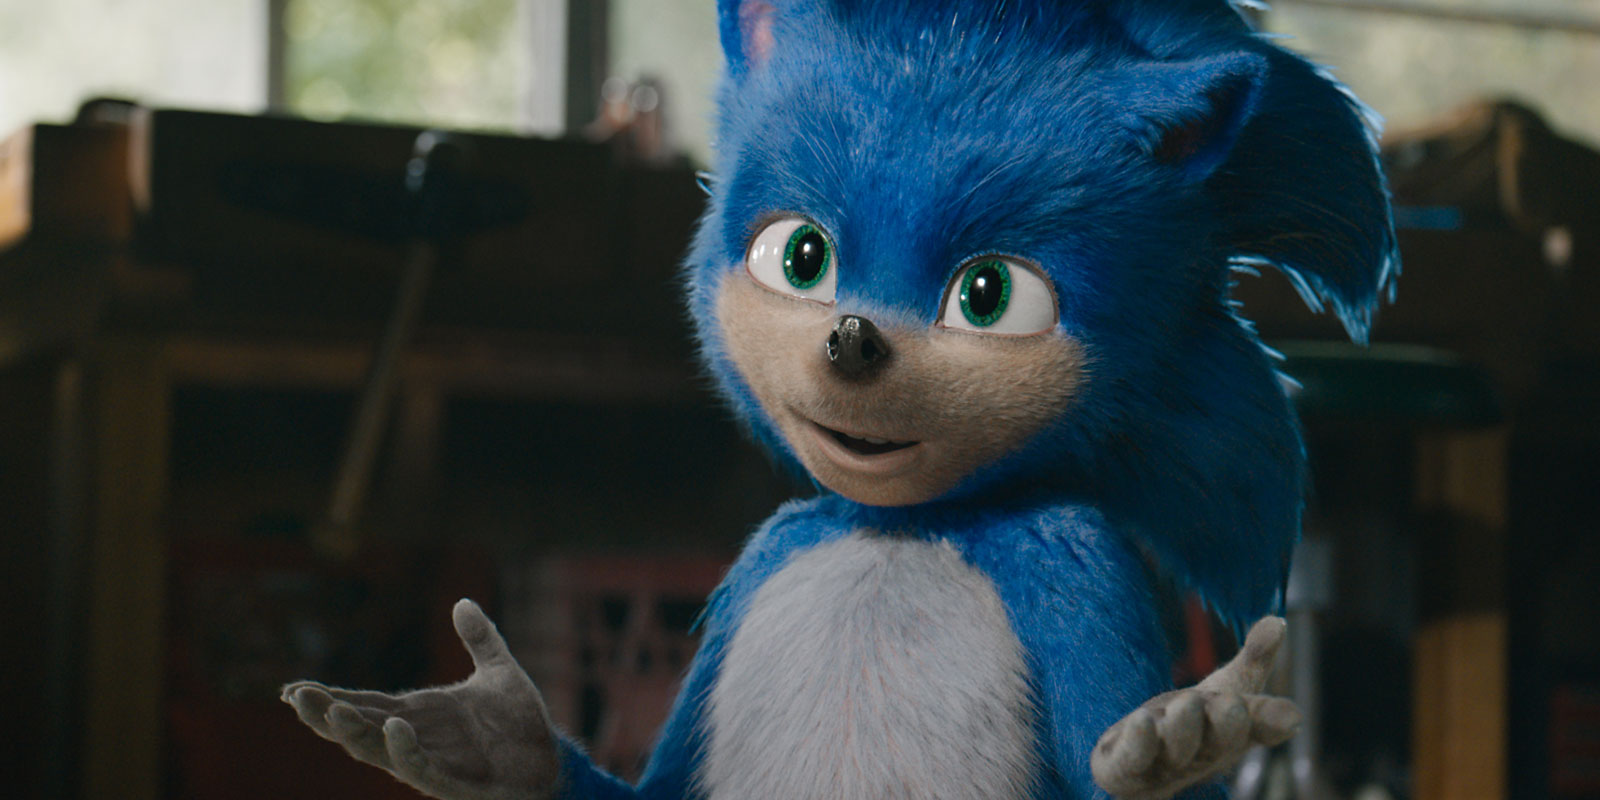 Sonic The Hedgehog (2019) – Official Trailer1600 x 800